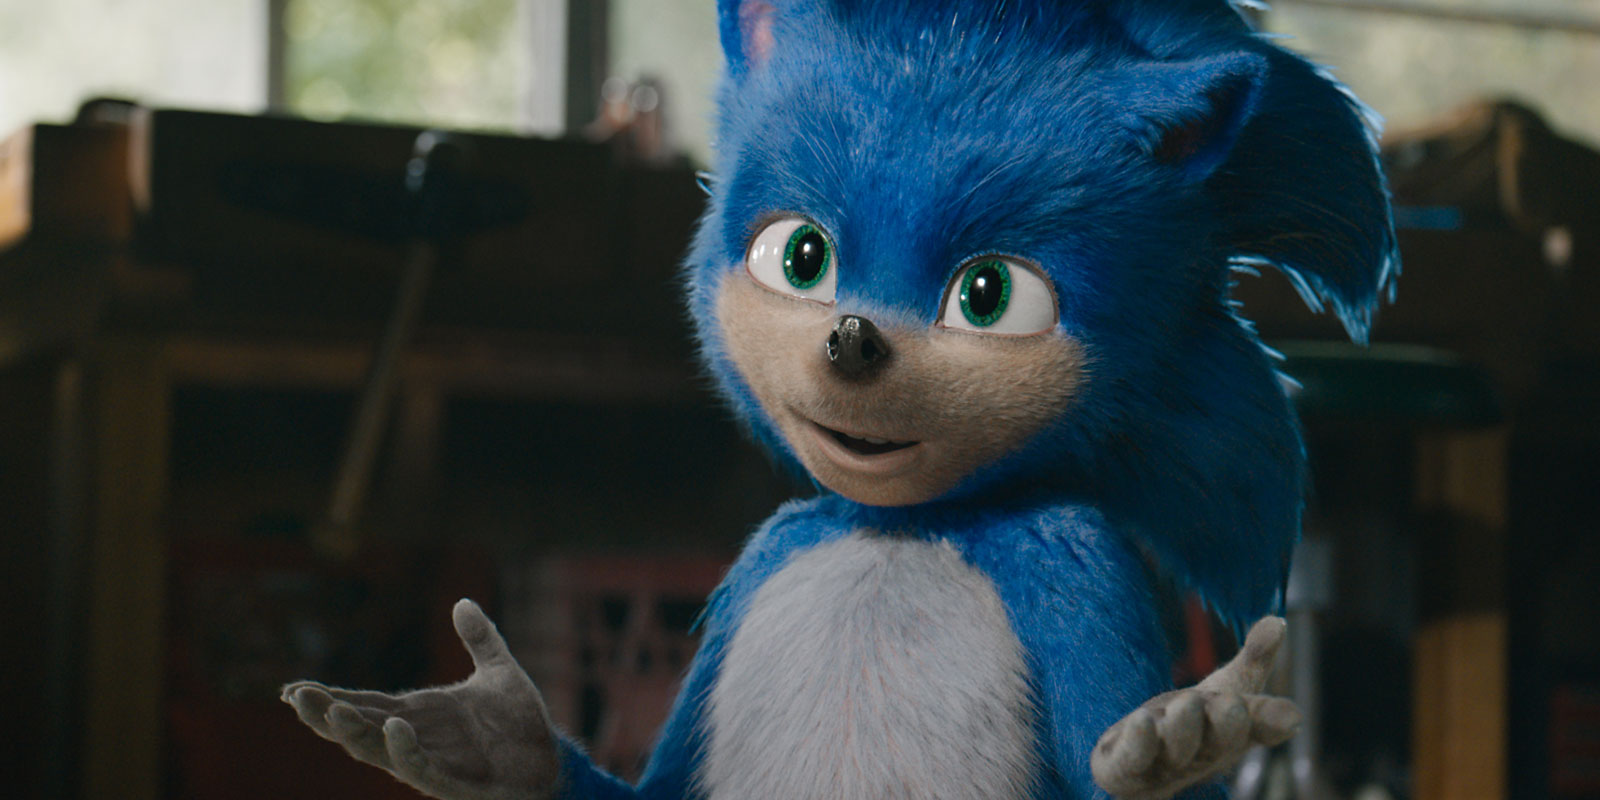 Sonic The Hedgehog (2019) – Official Trailer1600 x 800